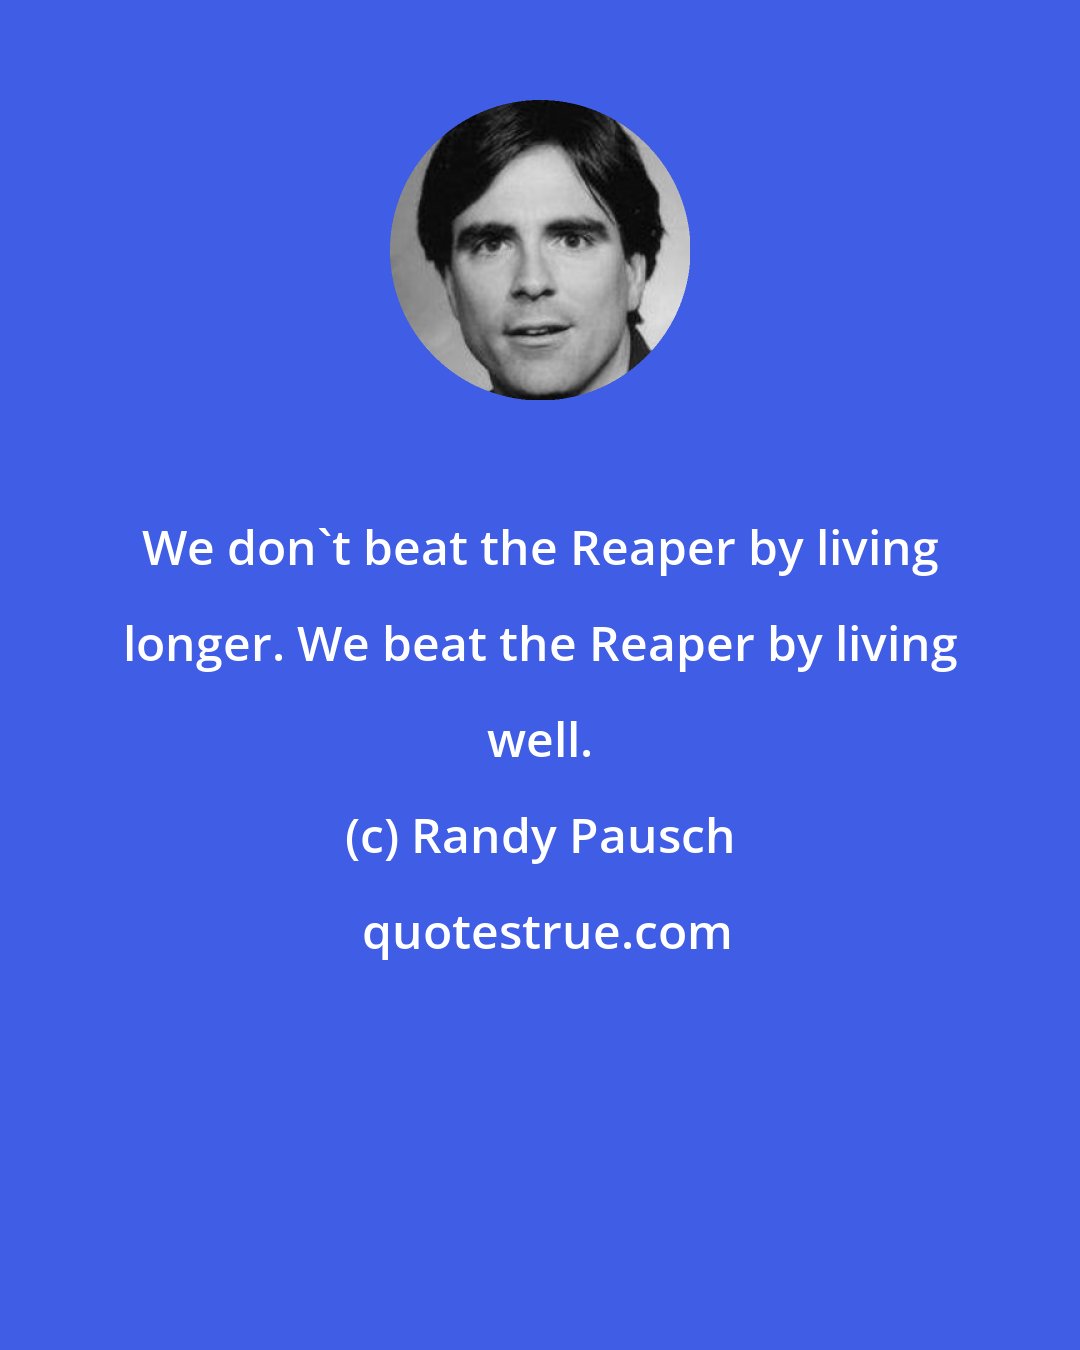 Randy Pausch: We don't beat the Reaper by living longer. We beat the Reaper by living well.